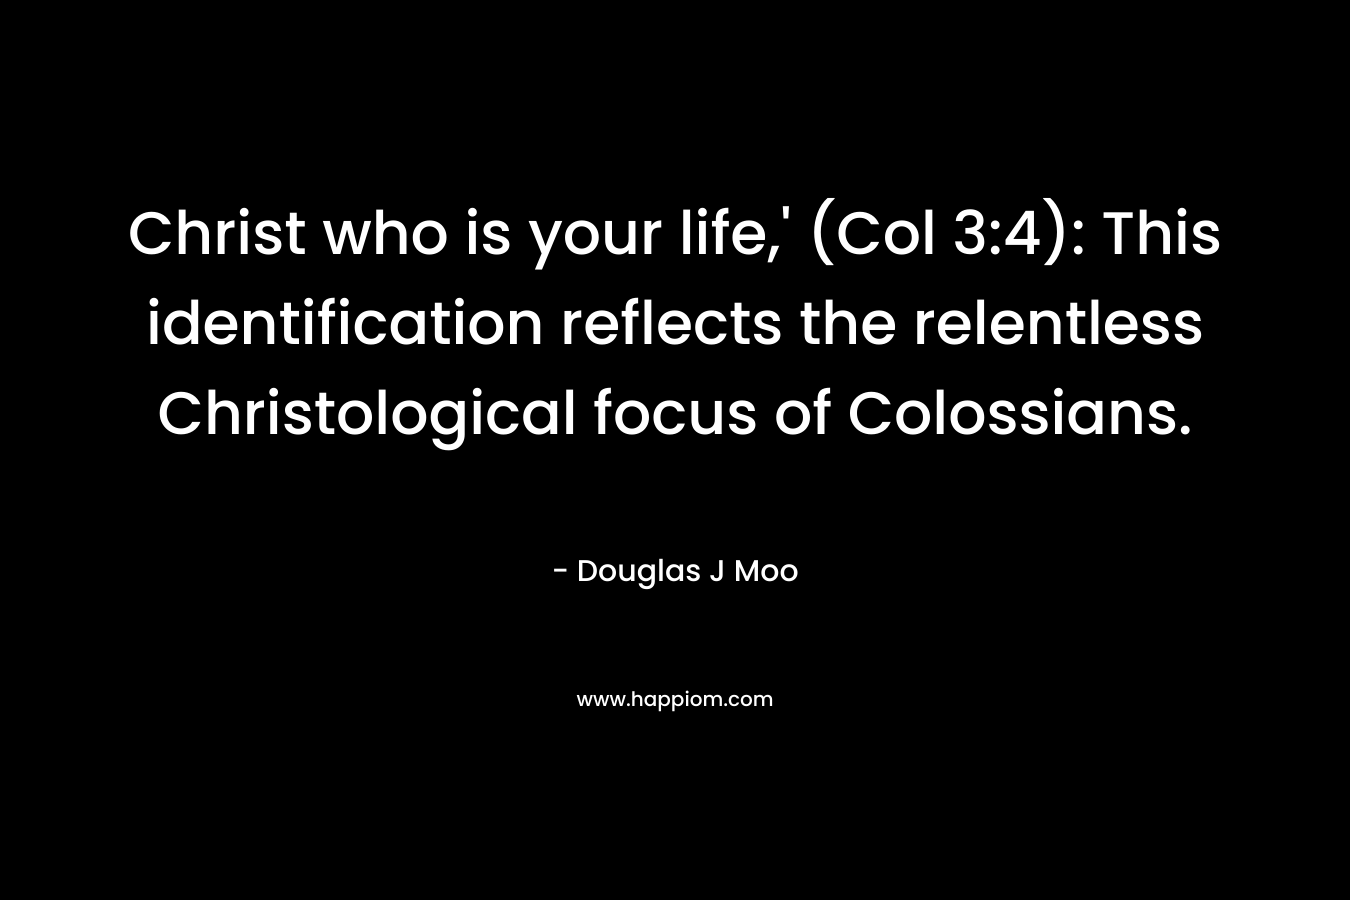 Christ who is your life,’ (Col 3:4): This identification reflects the relentless Christological focus of Colossians. – Douglas J Moo